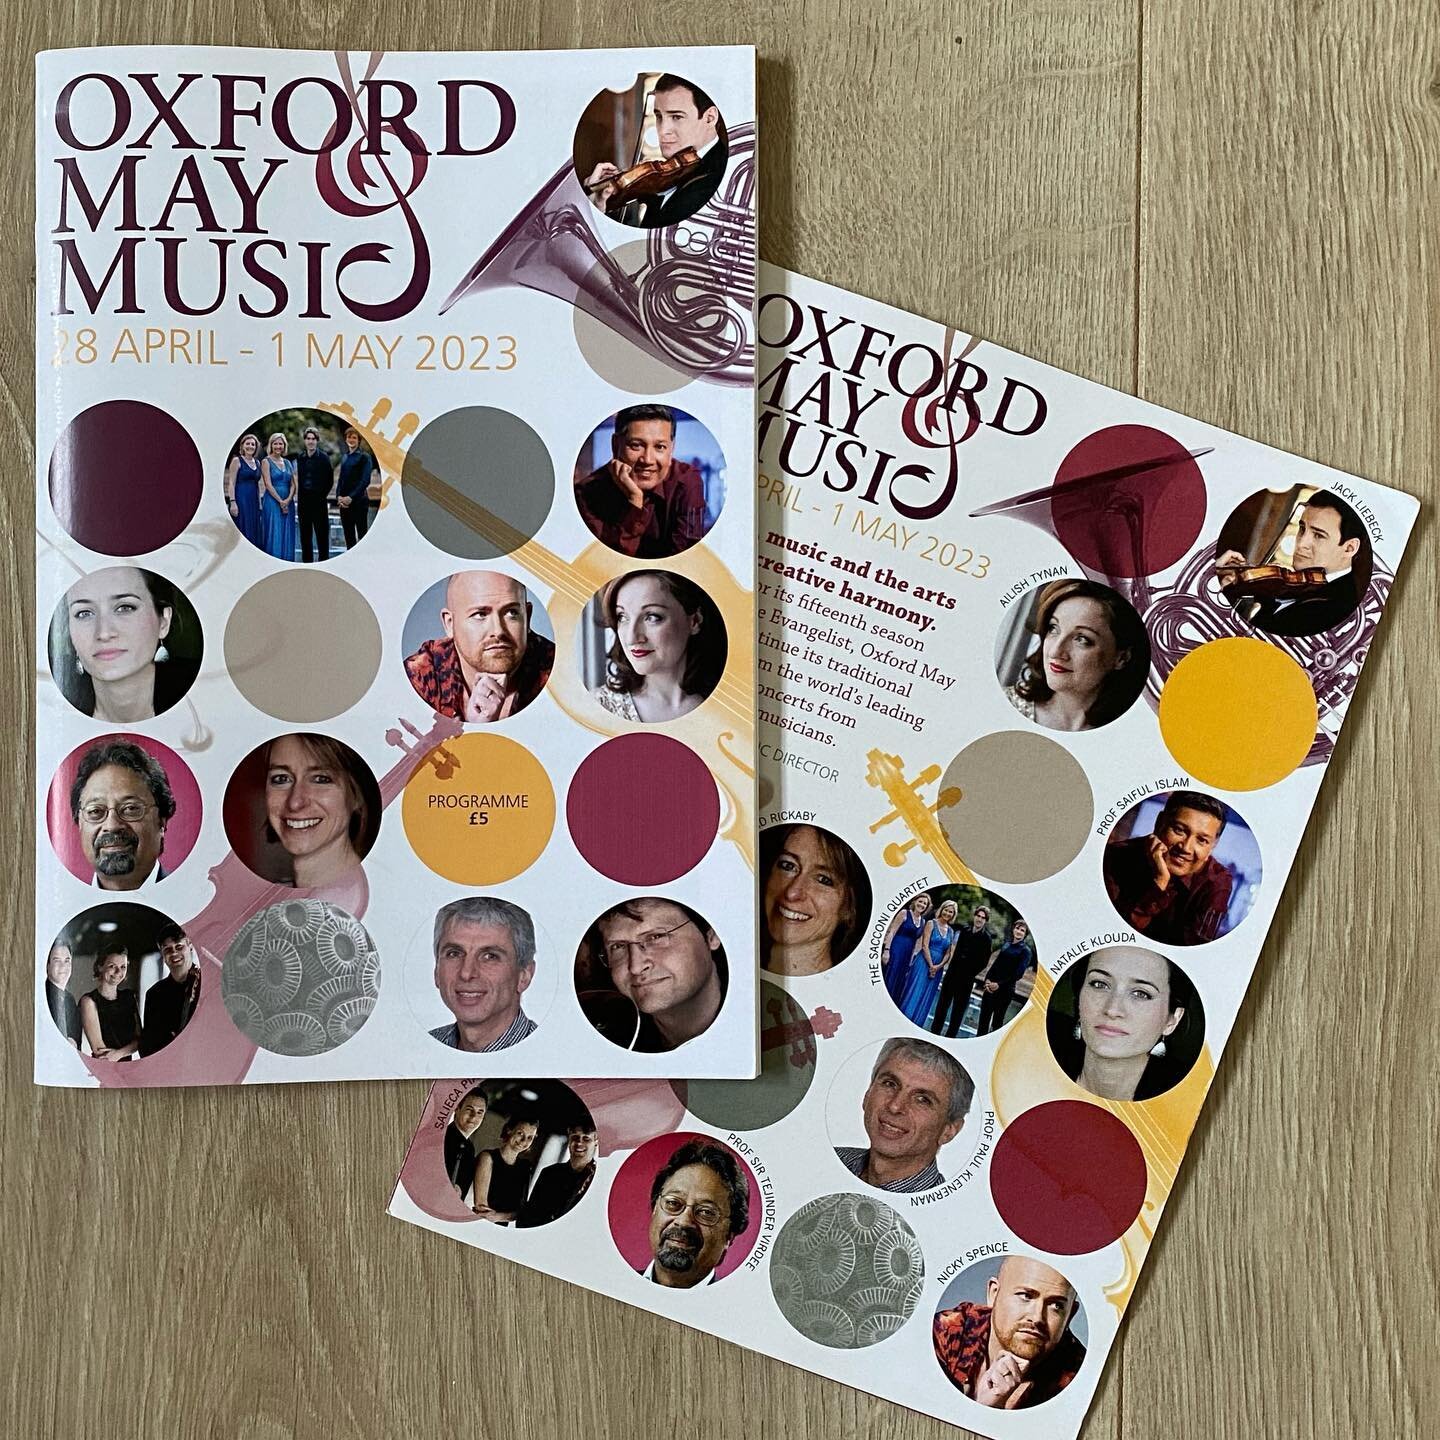 &ldquo;Science, music and the arts meet in creative harmony&rdquo; is the tagline for Oxford May Music, and it&rsquo;s been doing so for fifteen years. Bringing all of these elements together to create a harmonious design has been my job since the be